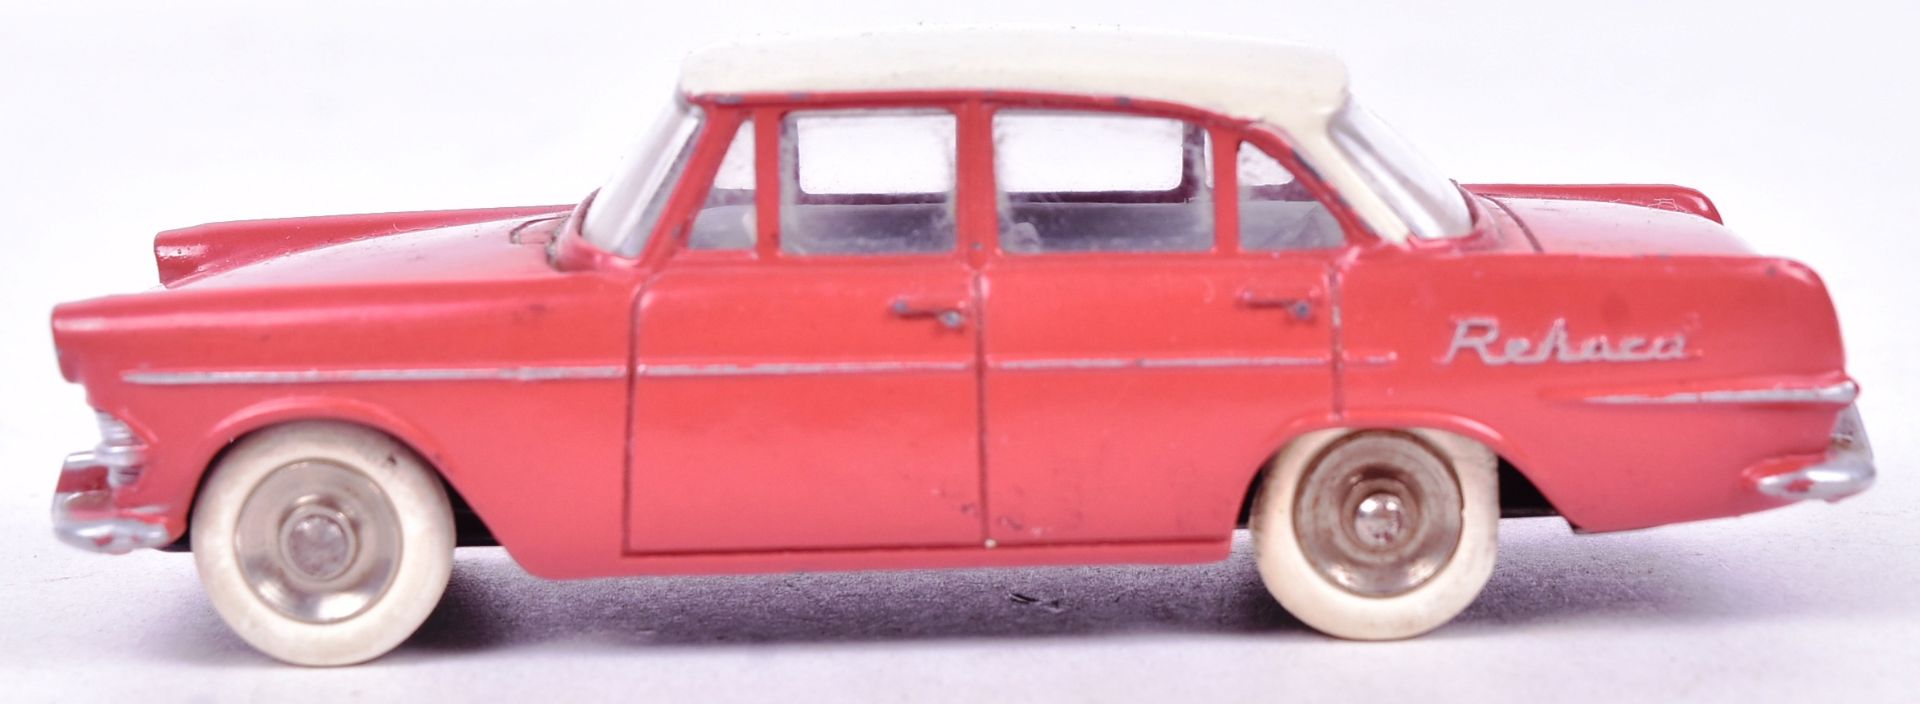 DIECAST - FRENCH DINKY TOYS - OPEL REKORD - Image 2 of 5